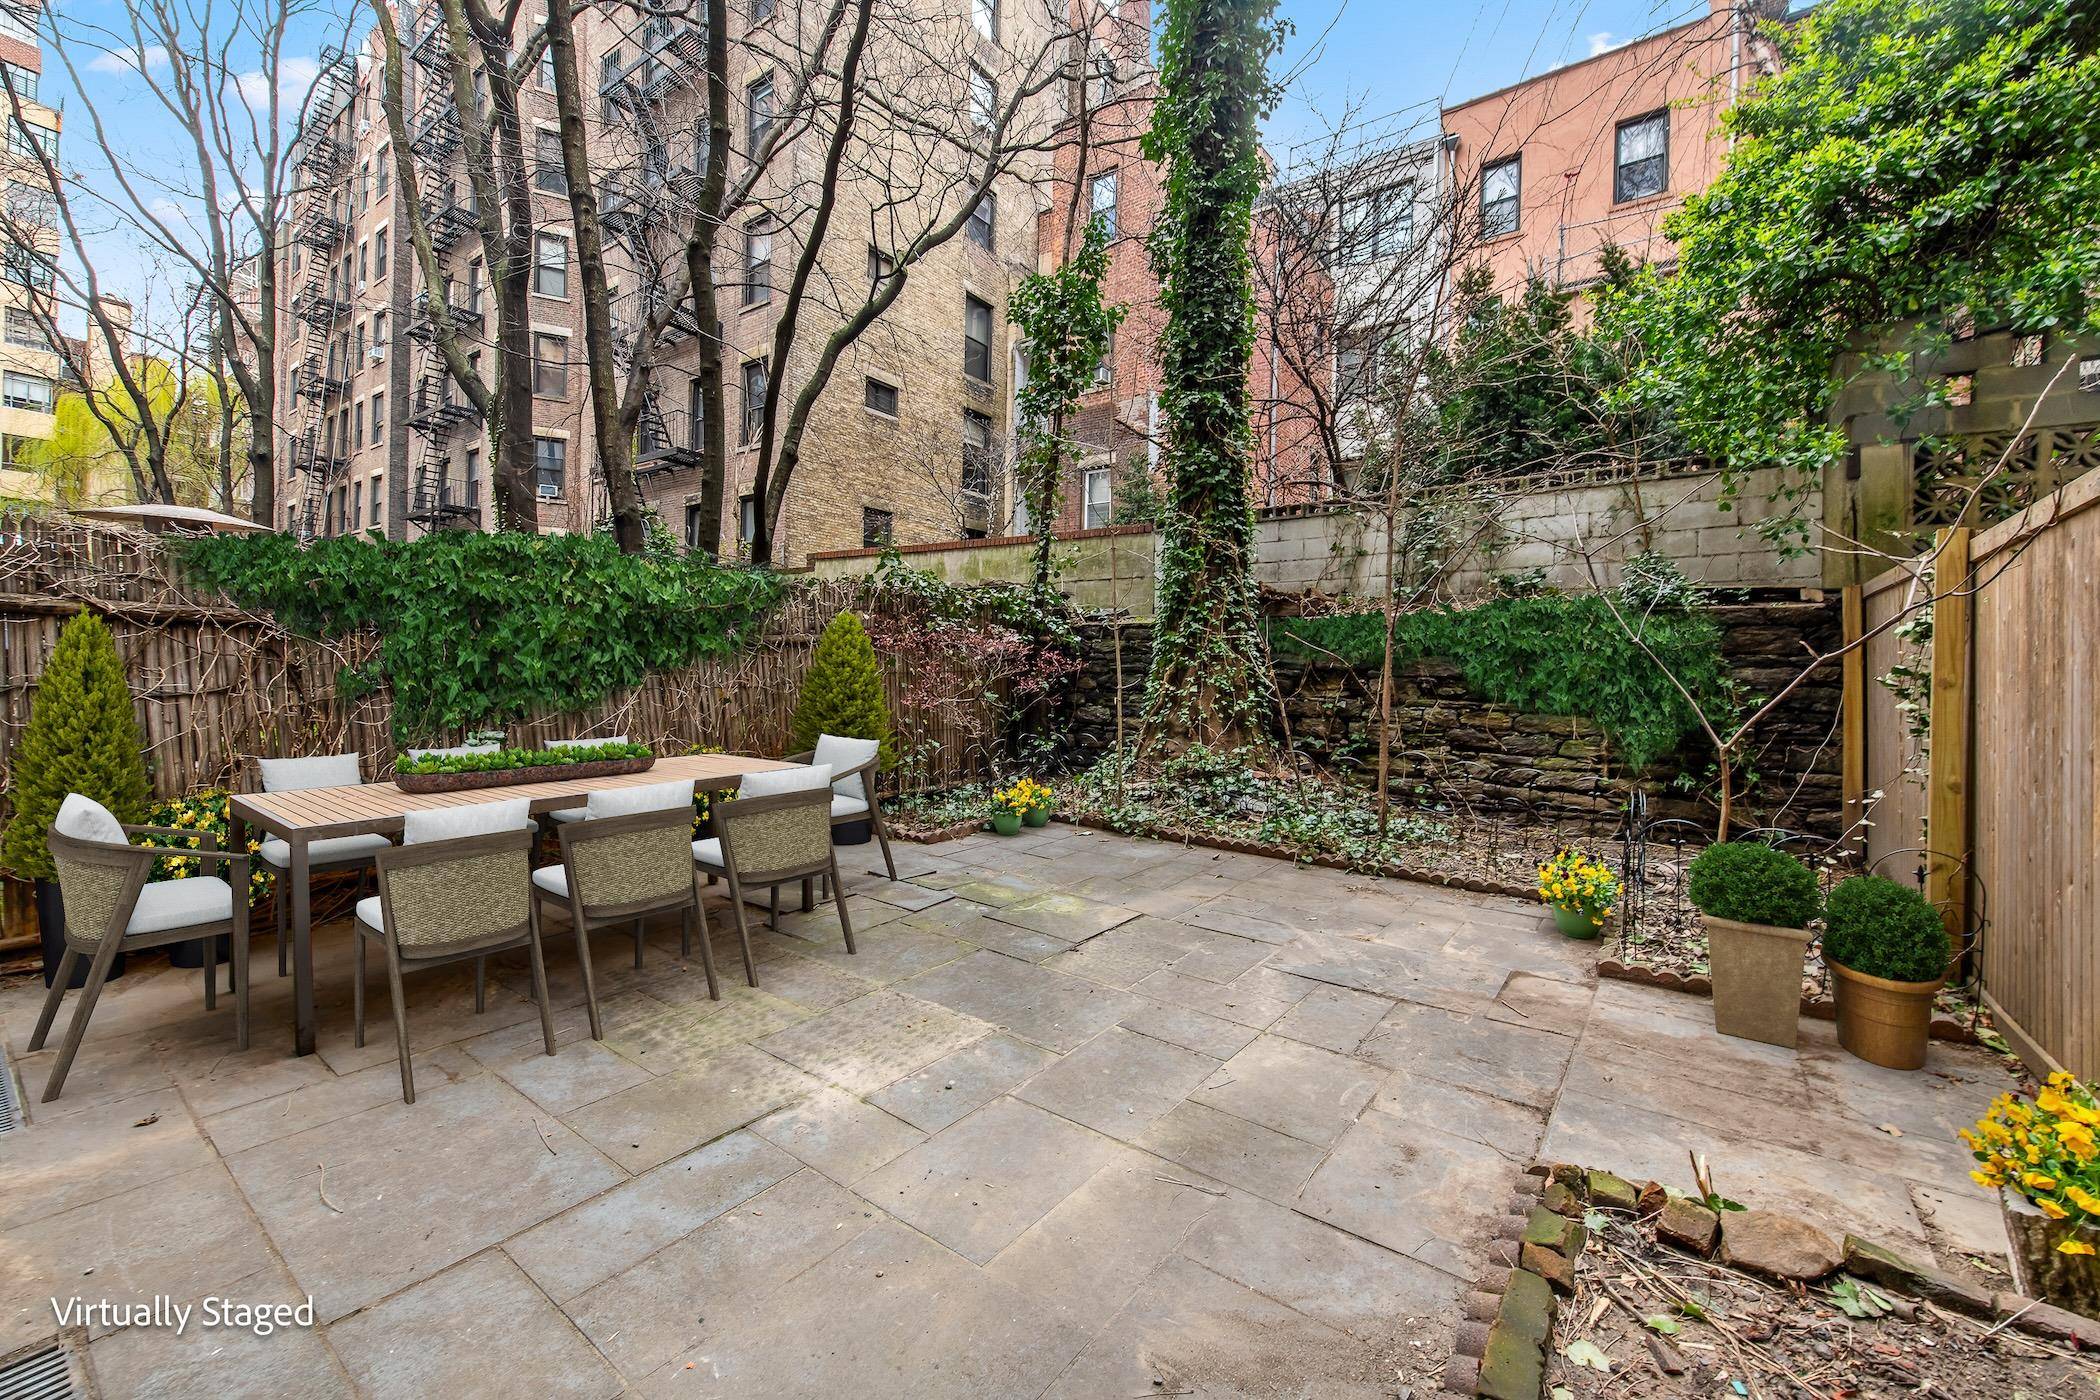 Welcome to this stunning garden level apartment in a charming Upper West Side brownstone.